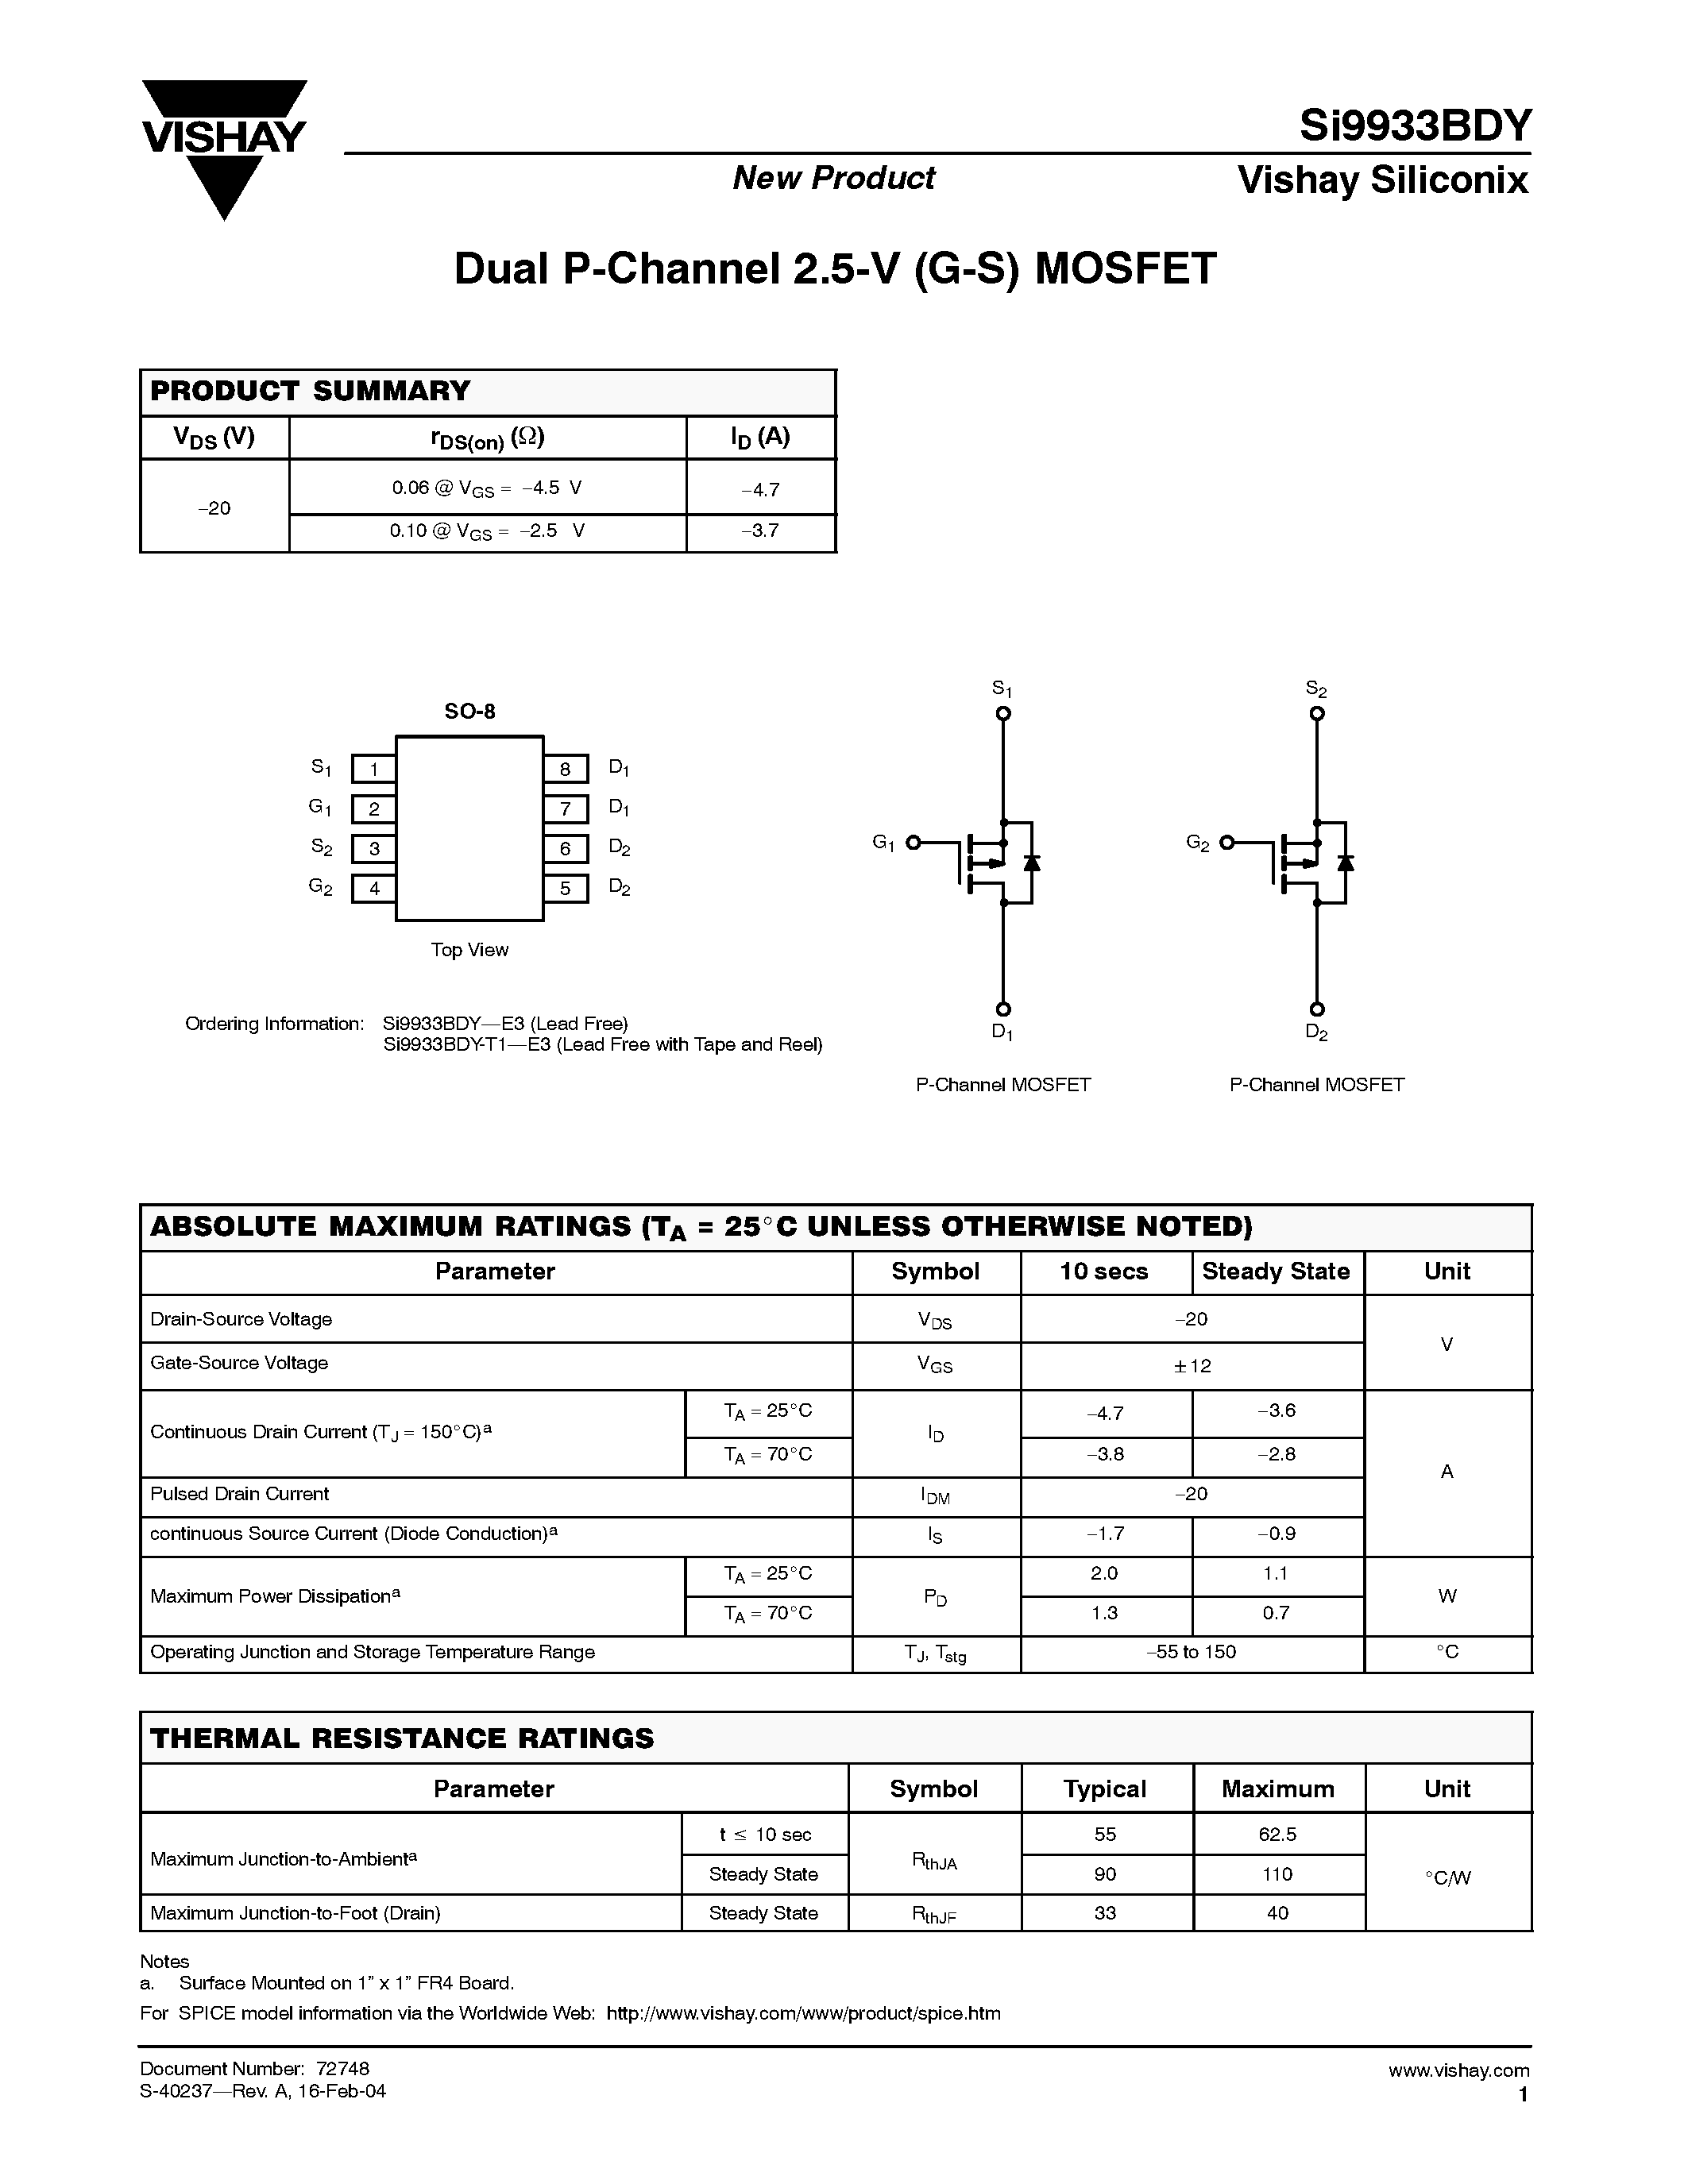 Datasheet SI9933BDY - Dual P-Channel 2.5-V (G-S) MOSFET page 1